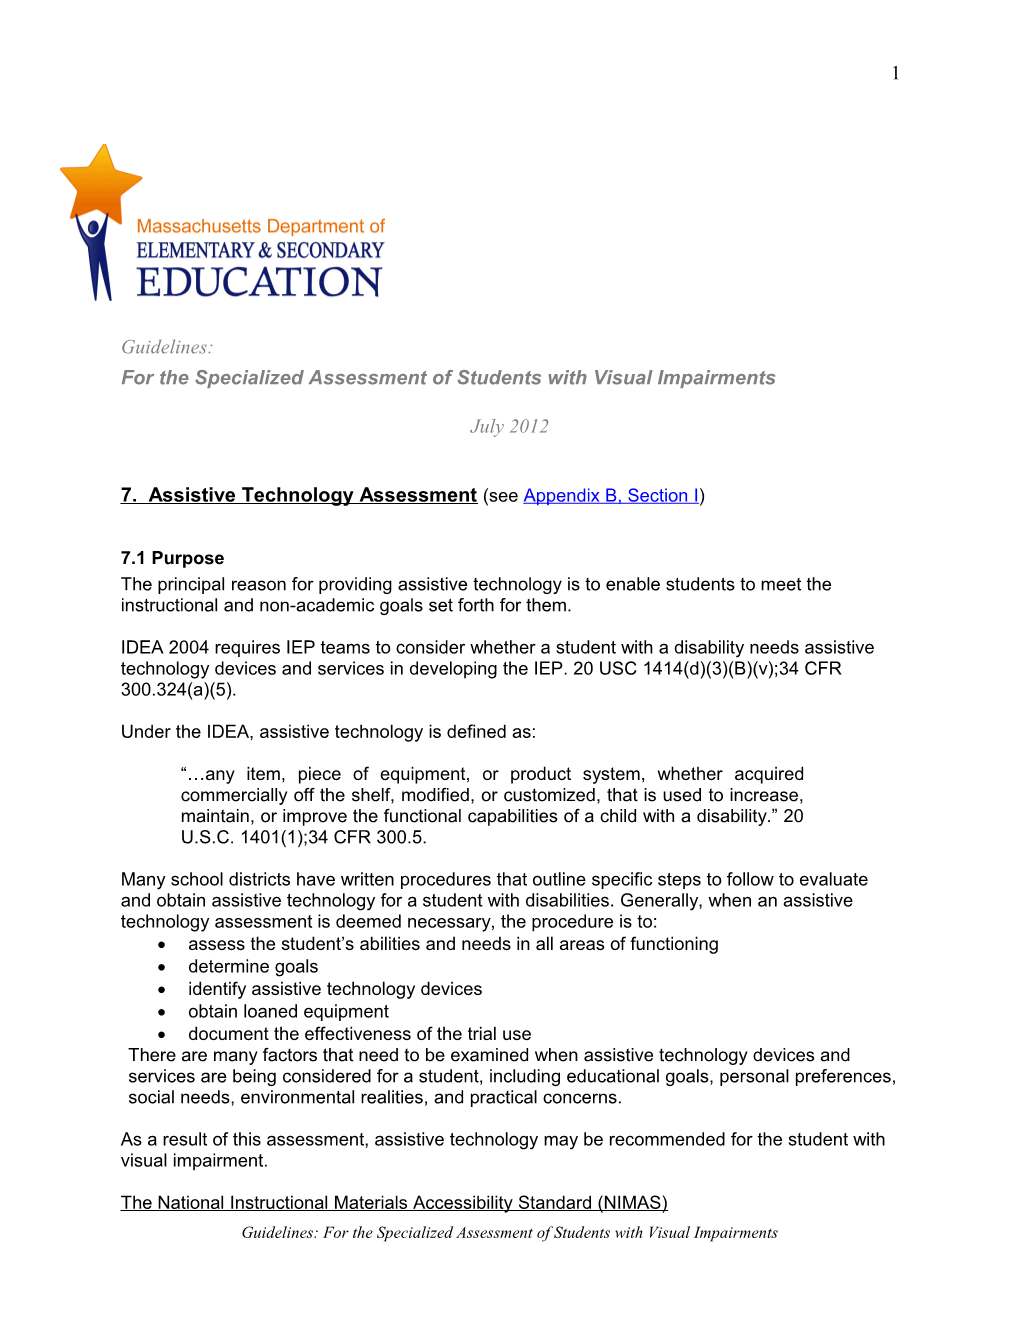 Guidelines: for the Specialized Assessment of Students with Visual Impairments